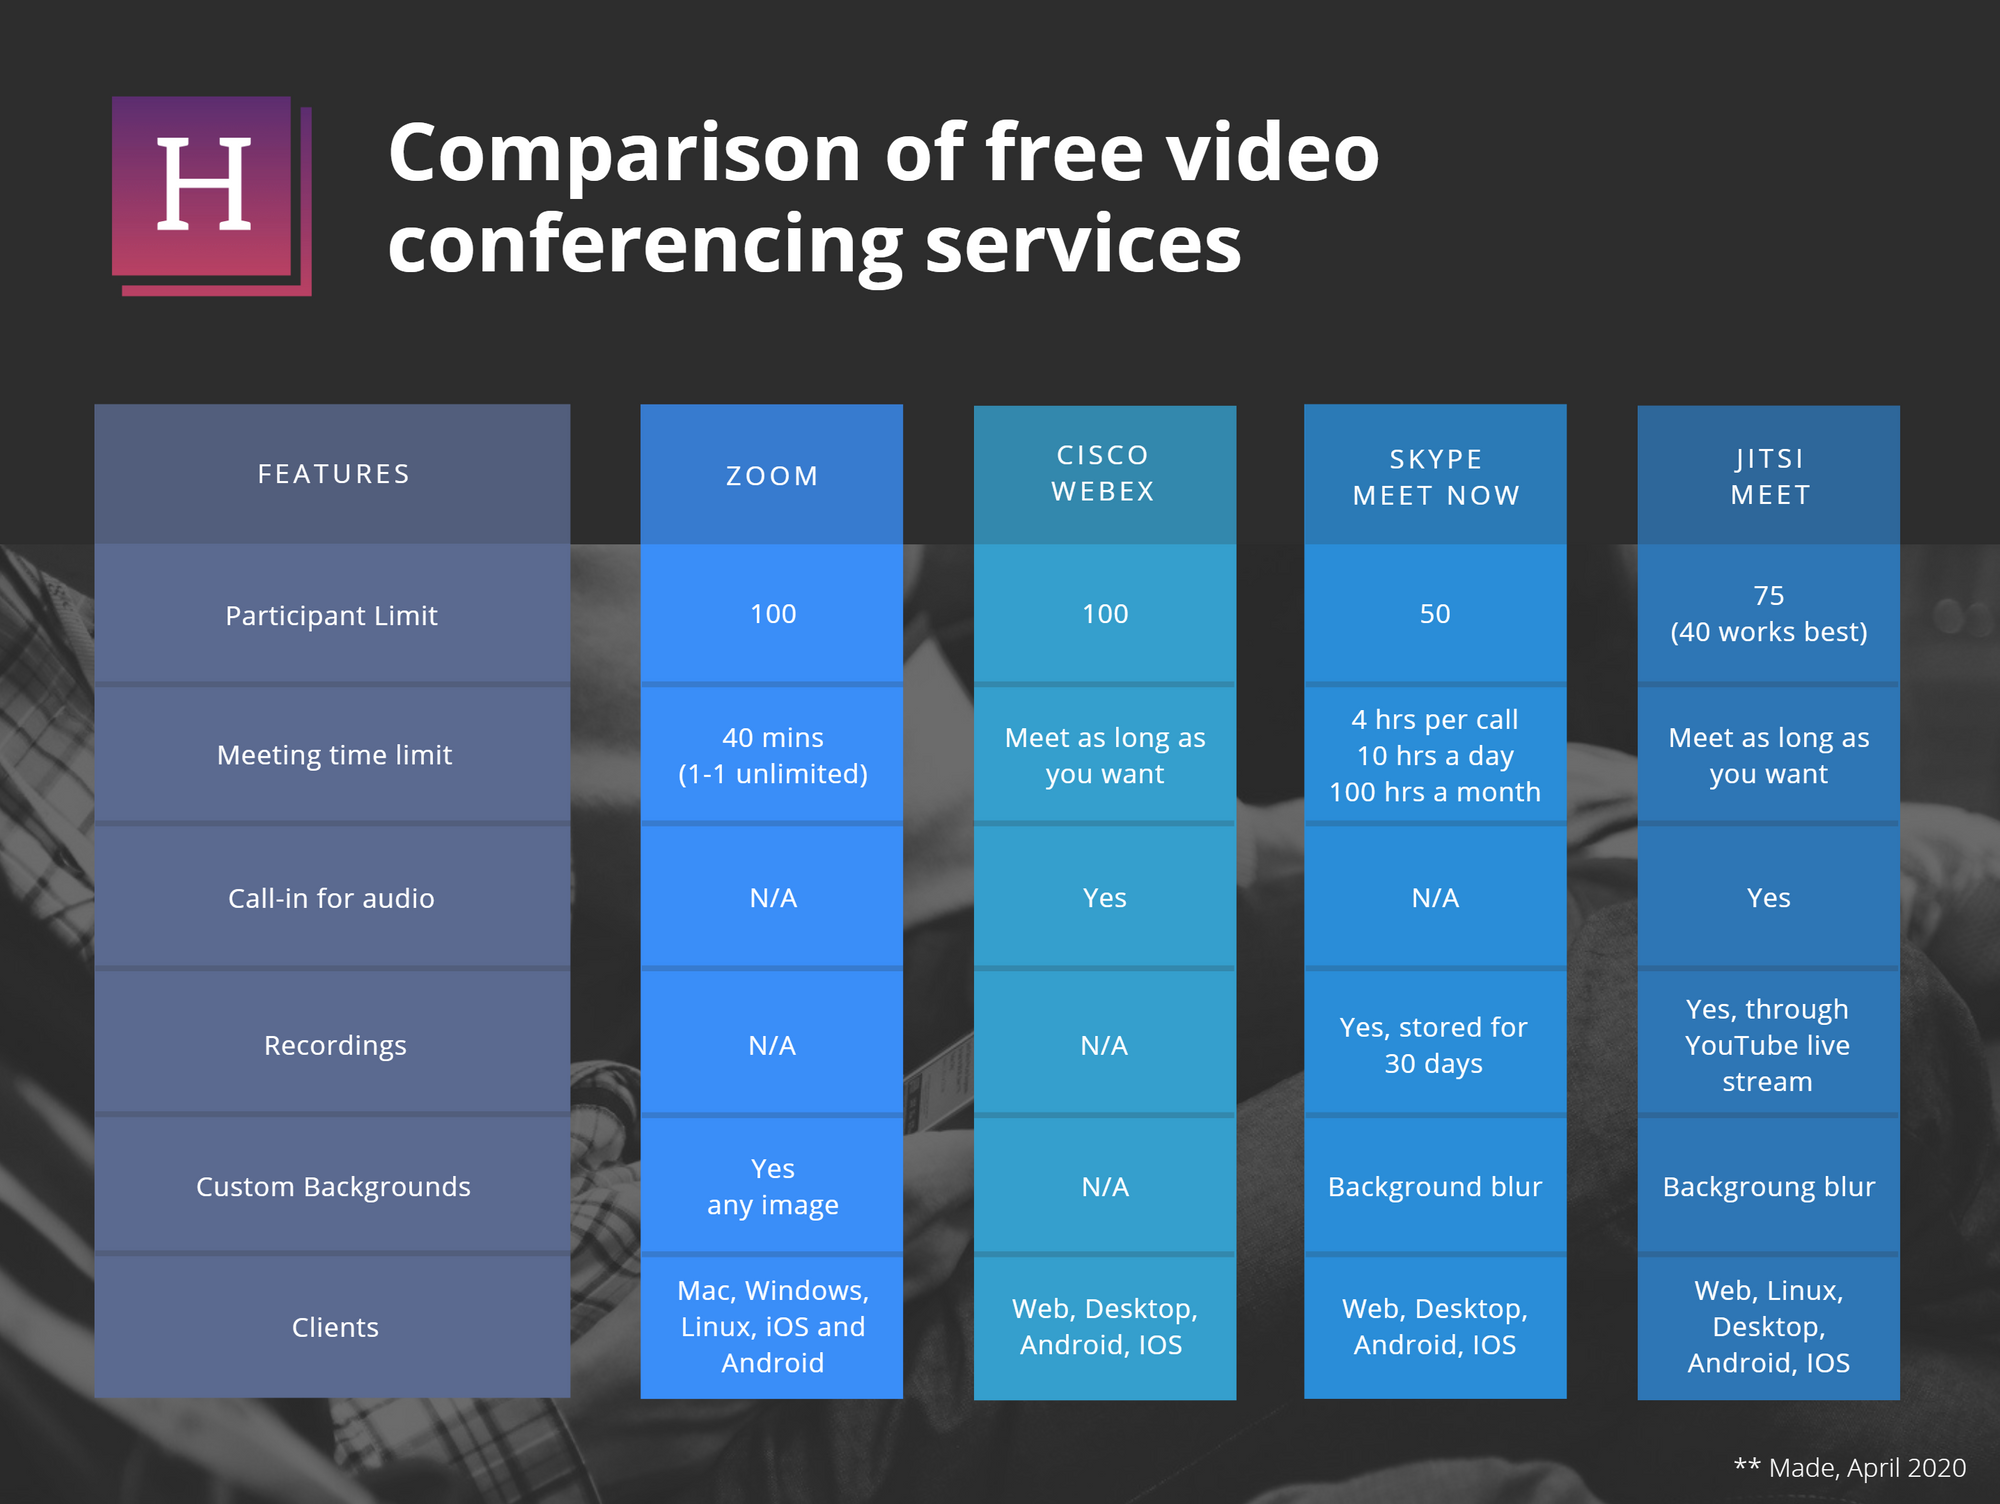 Comparison of free video conferencing services